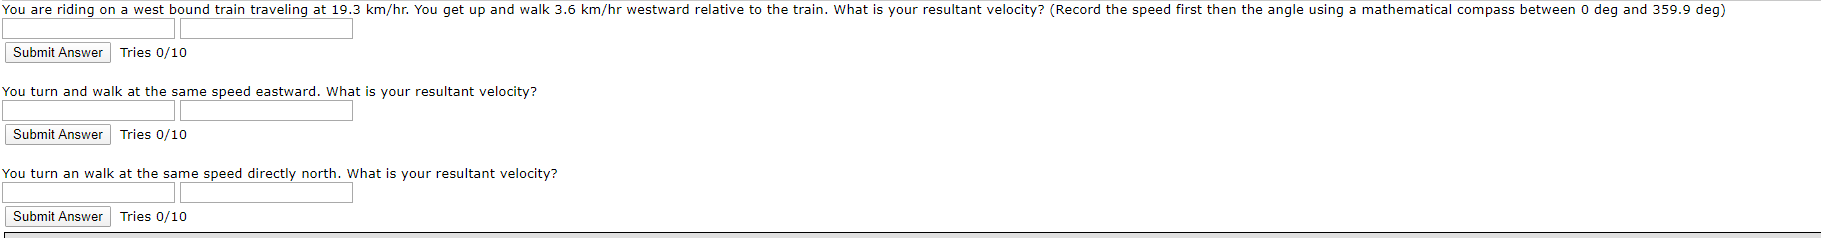 You are riding on a west bound train traveling at 19.3
km/hr. You get
up and walk 3.6 km/hr
westward relative to the train. What is your resultant velocity? (Record the speed first then the angle
using a mathematical compass between
o deg and 359.9 deg)
Submit Answer Tries 0/10
You turn and walk at the same speed eastward. What is your resultant velocity?
Submit Answer
Tries 0/10
You turn an walk at the same
speed directly north. What is your resultant velocity?
Submit Answer
Tries 0/10
